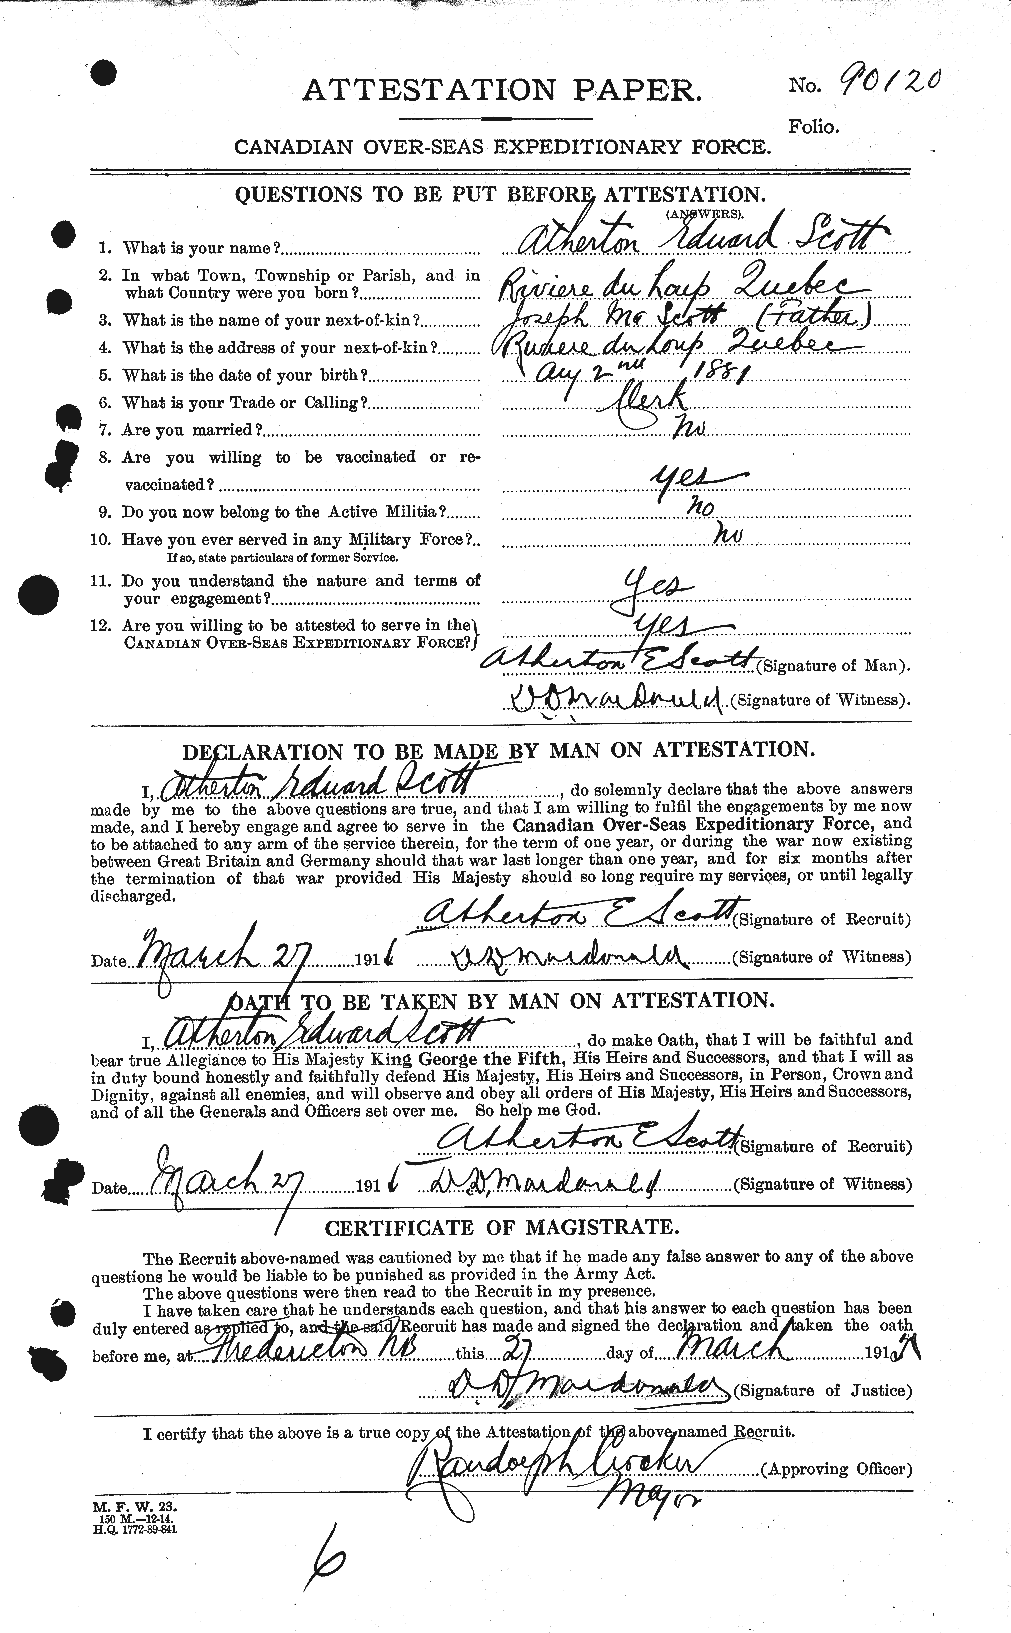 Personnel Records of the First World War - CEF 086225a